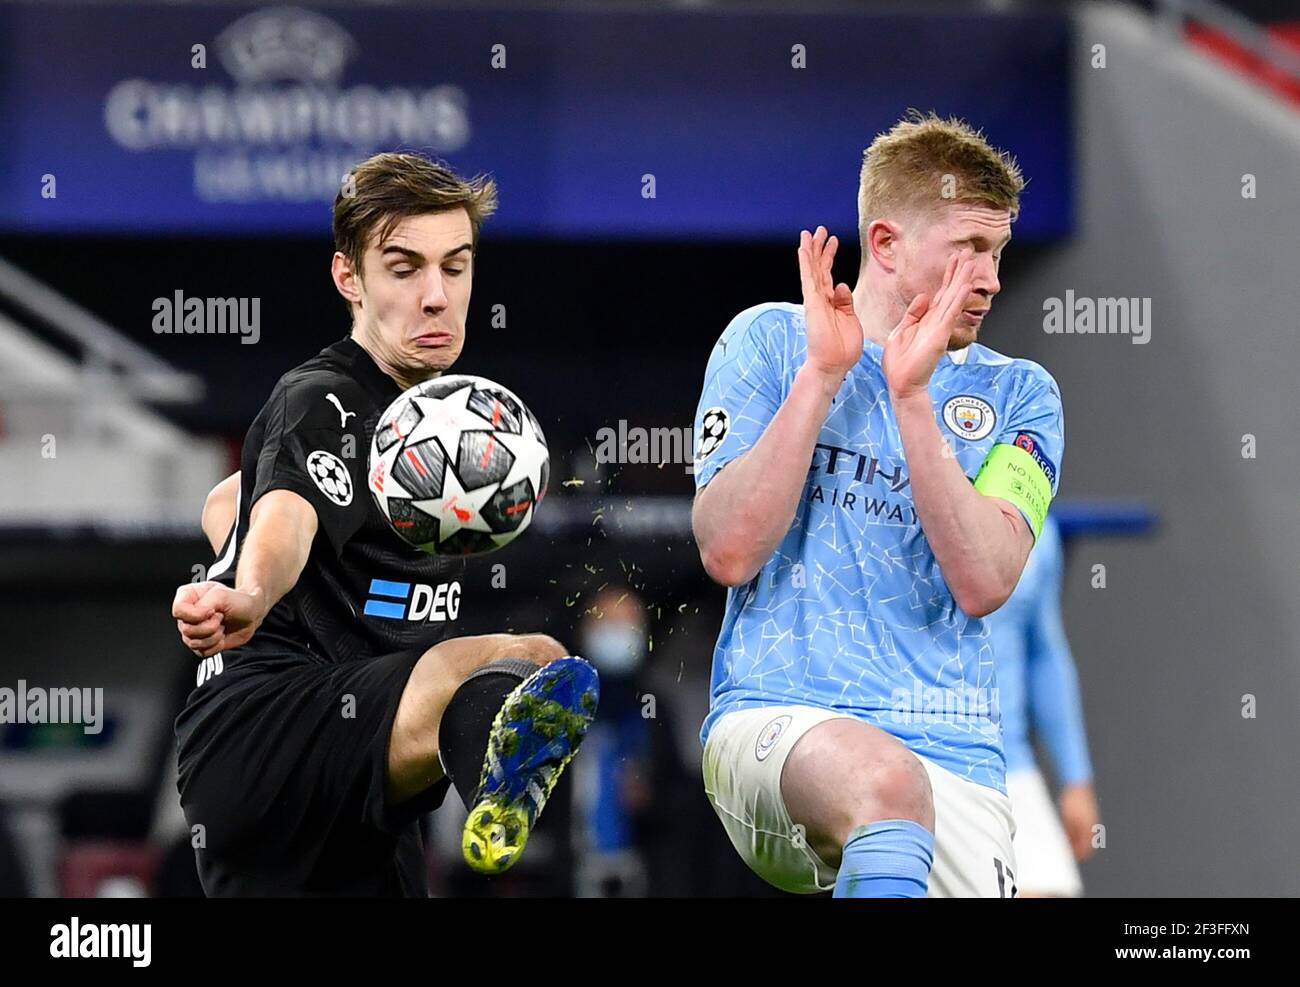 Budapest, Hungary. 16th Mar, 2021. Football: Champions League, Manchester  City - Borussia Mönchengladbach, knockout round, round of 16, second leg at  Puskas Arena. Gladbach's Matthias Ginter and Manchester City's Kevin De  Bruyne